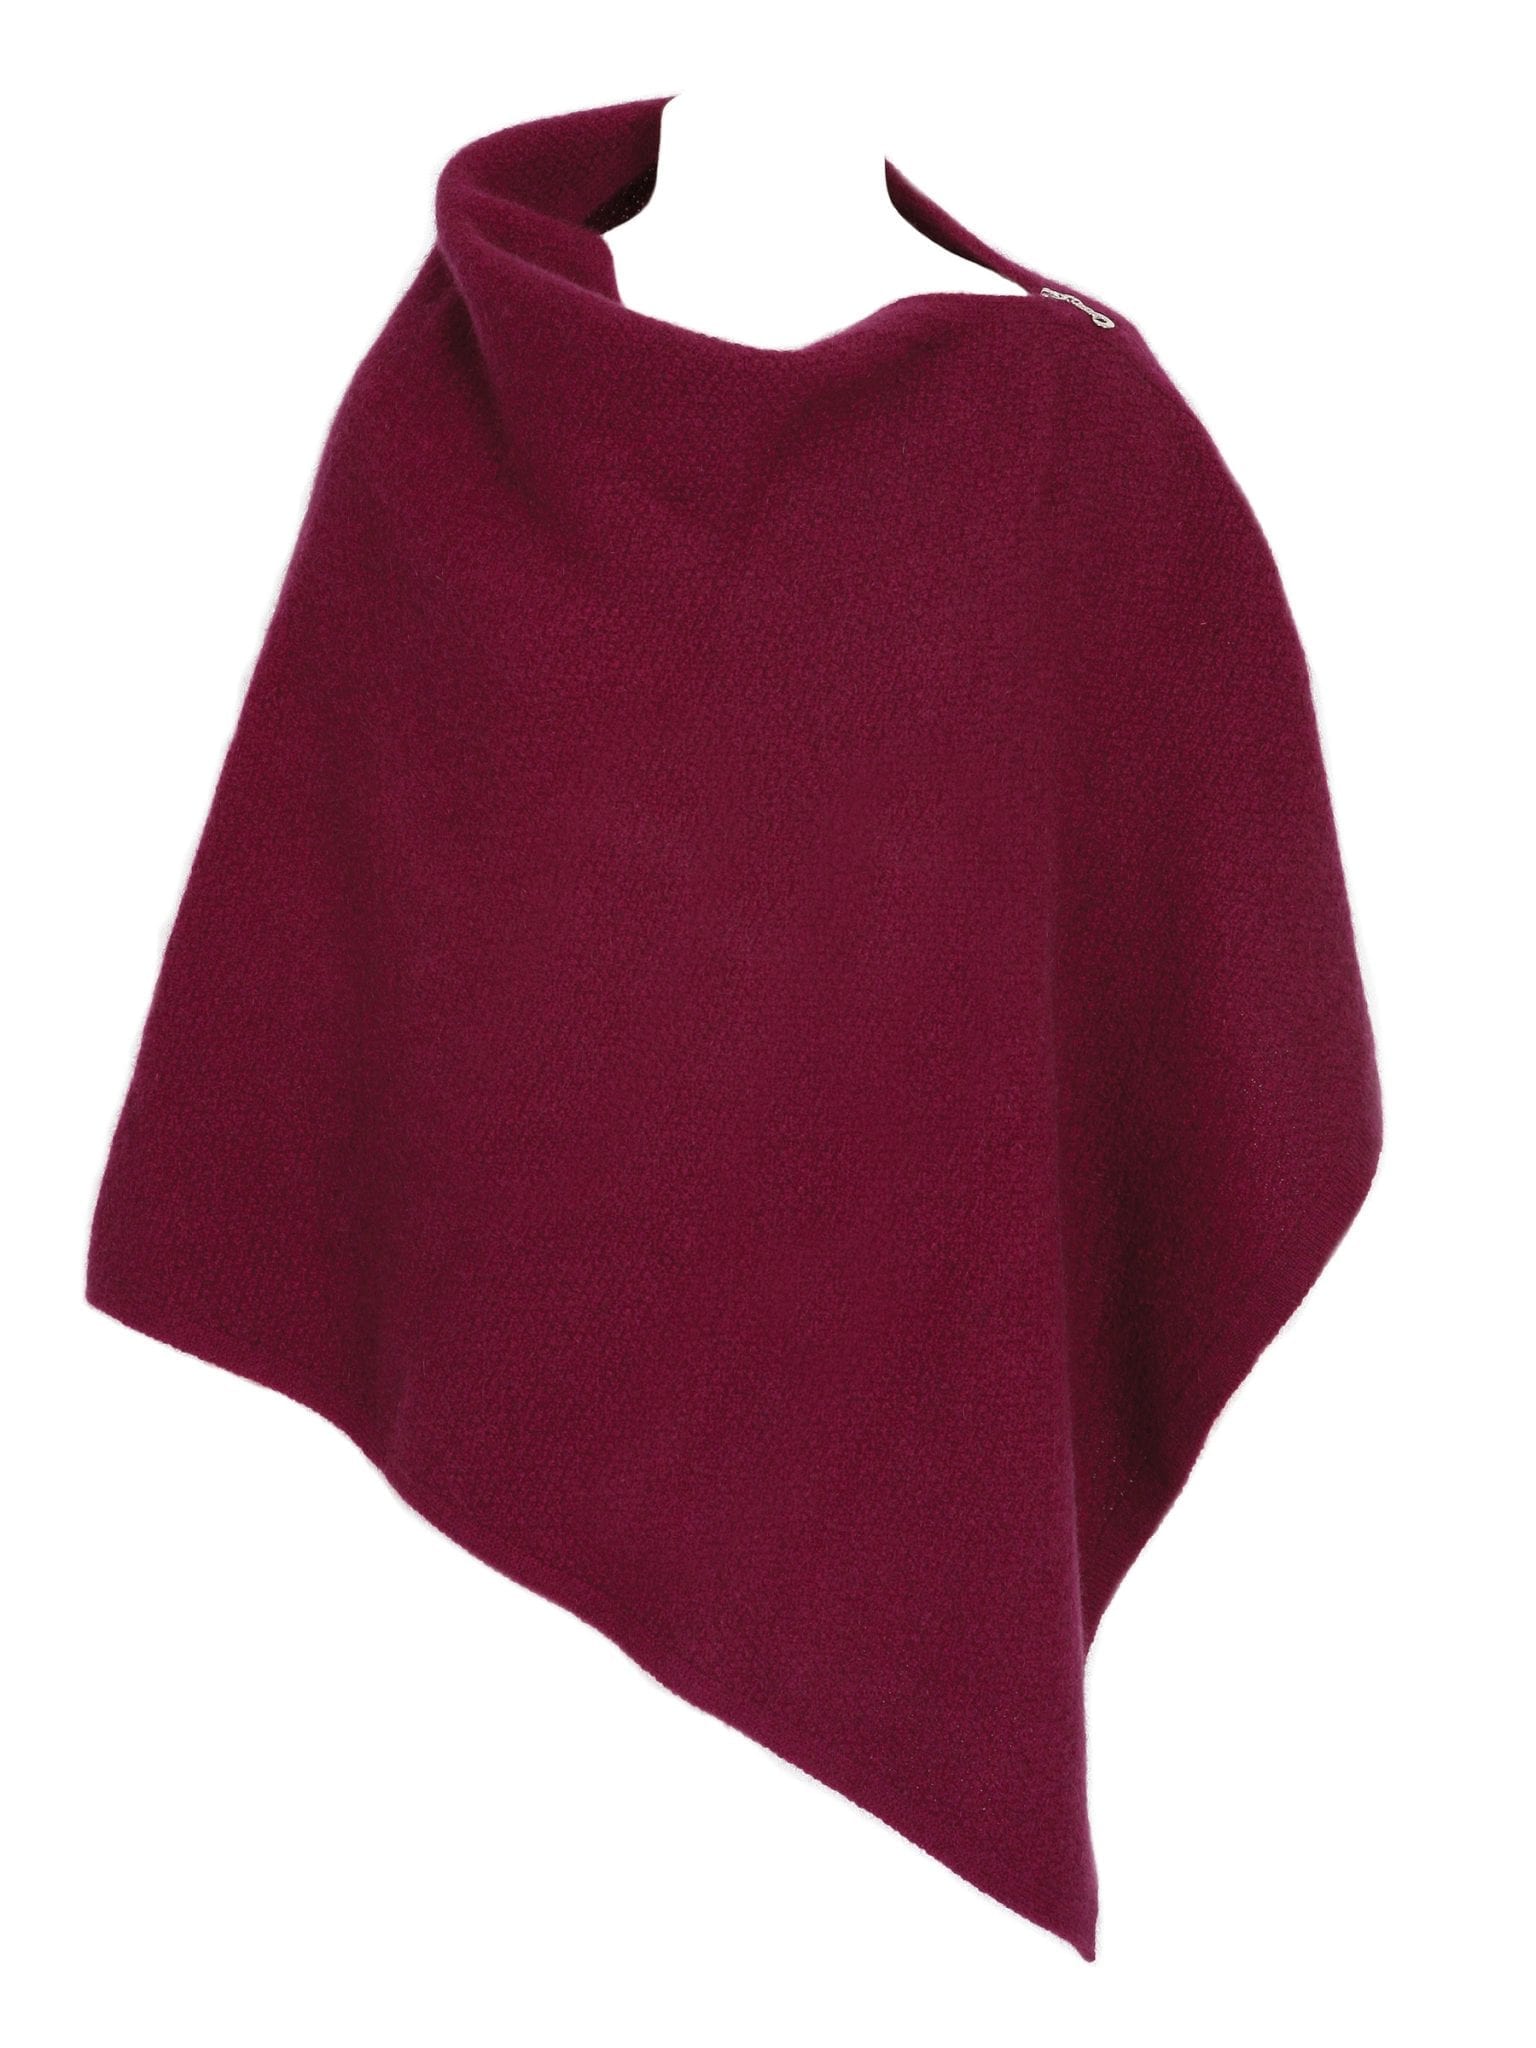 A beautiful textured wrap that can be worn several ways - as a poncho with the zip over the shoulder, zip to the front like a cape, as a wrap or scarf and if you feel a bit daring, a skirt! Available in 12 colourways. Made in NZ by Lothlorian. Berry.